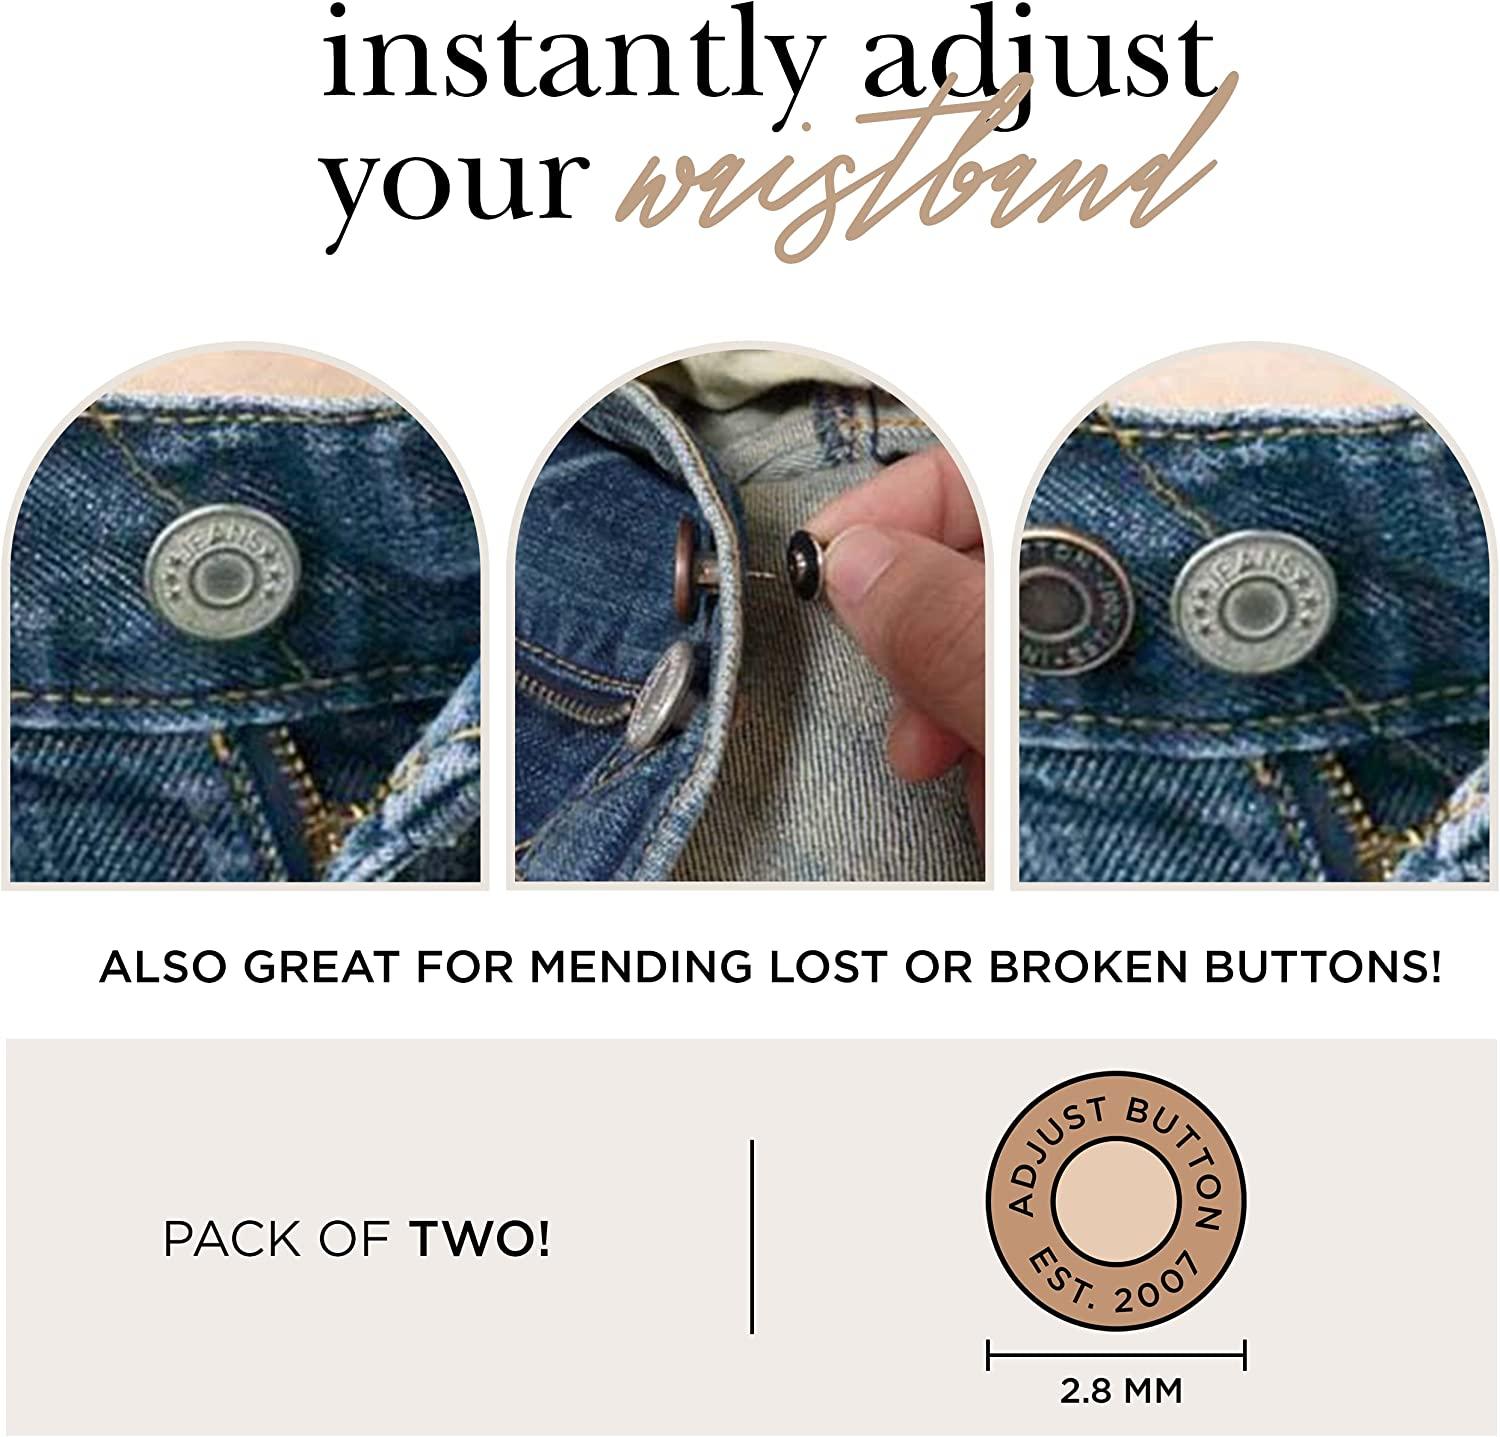 Nippies Adjust-a-Button for Jeans - Pack of 2 Adjustable, Replacement  Buttons for Jeans and Denim - Instant Adjuster Button Pins for Tight or Loose  Pants